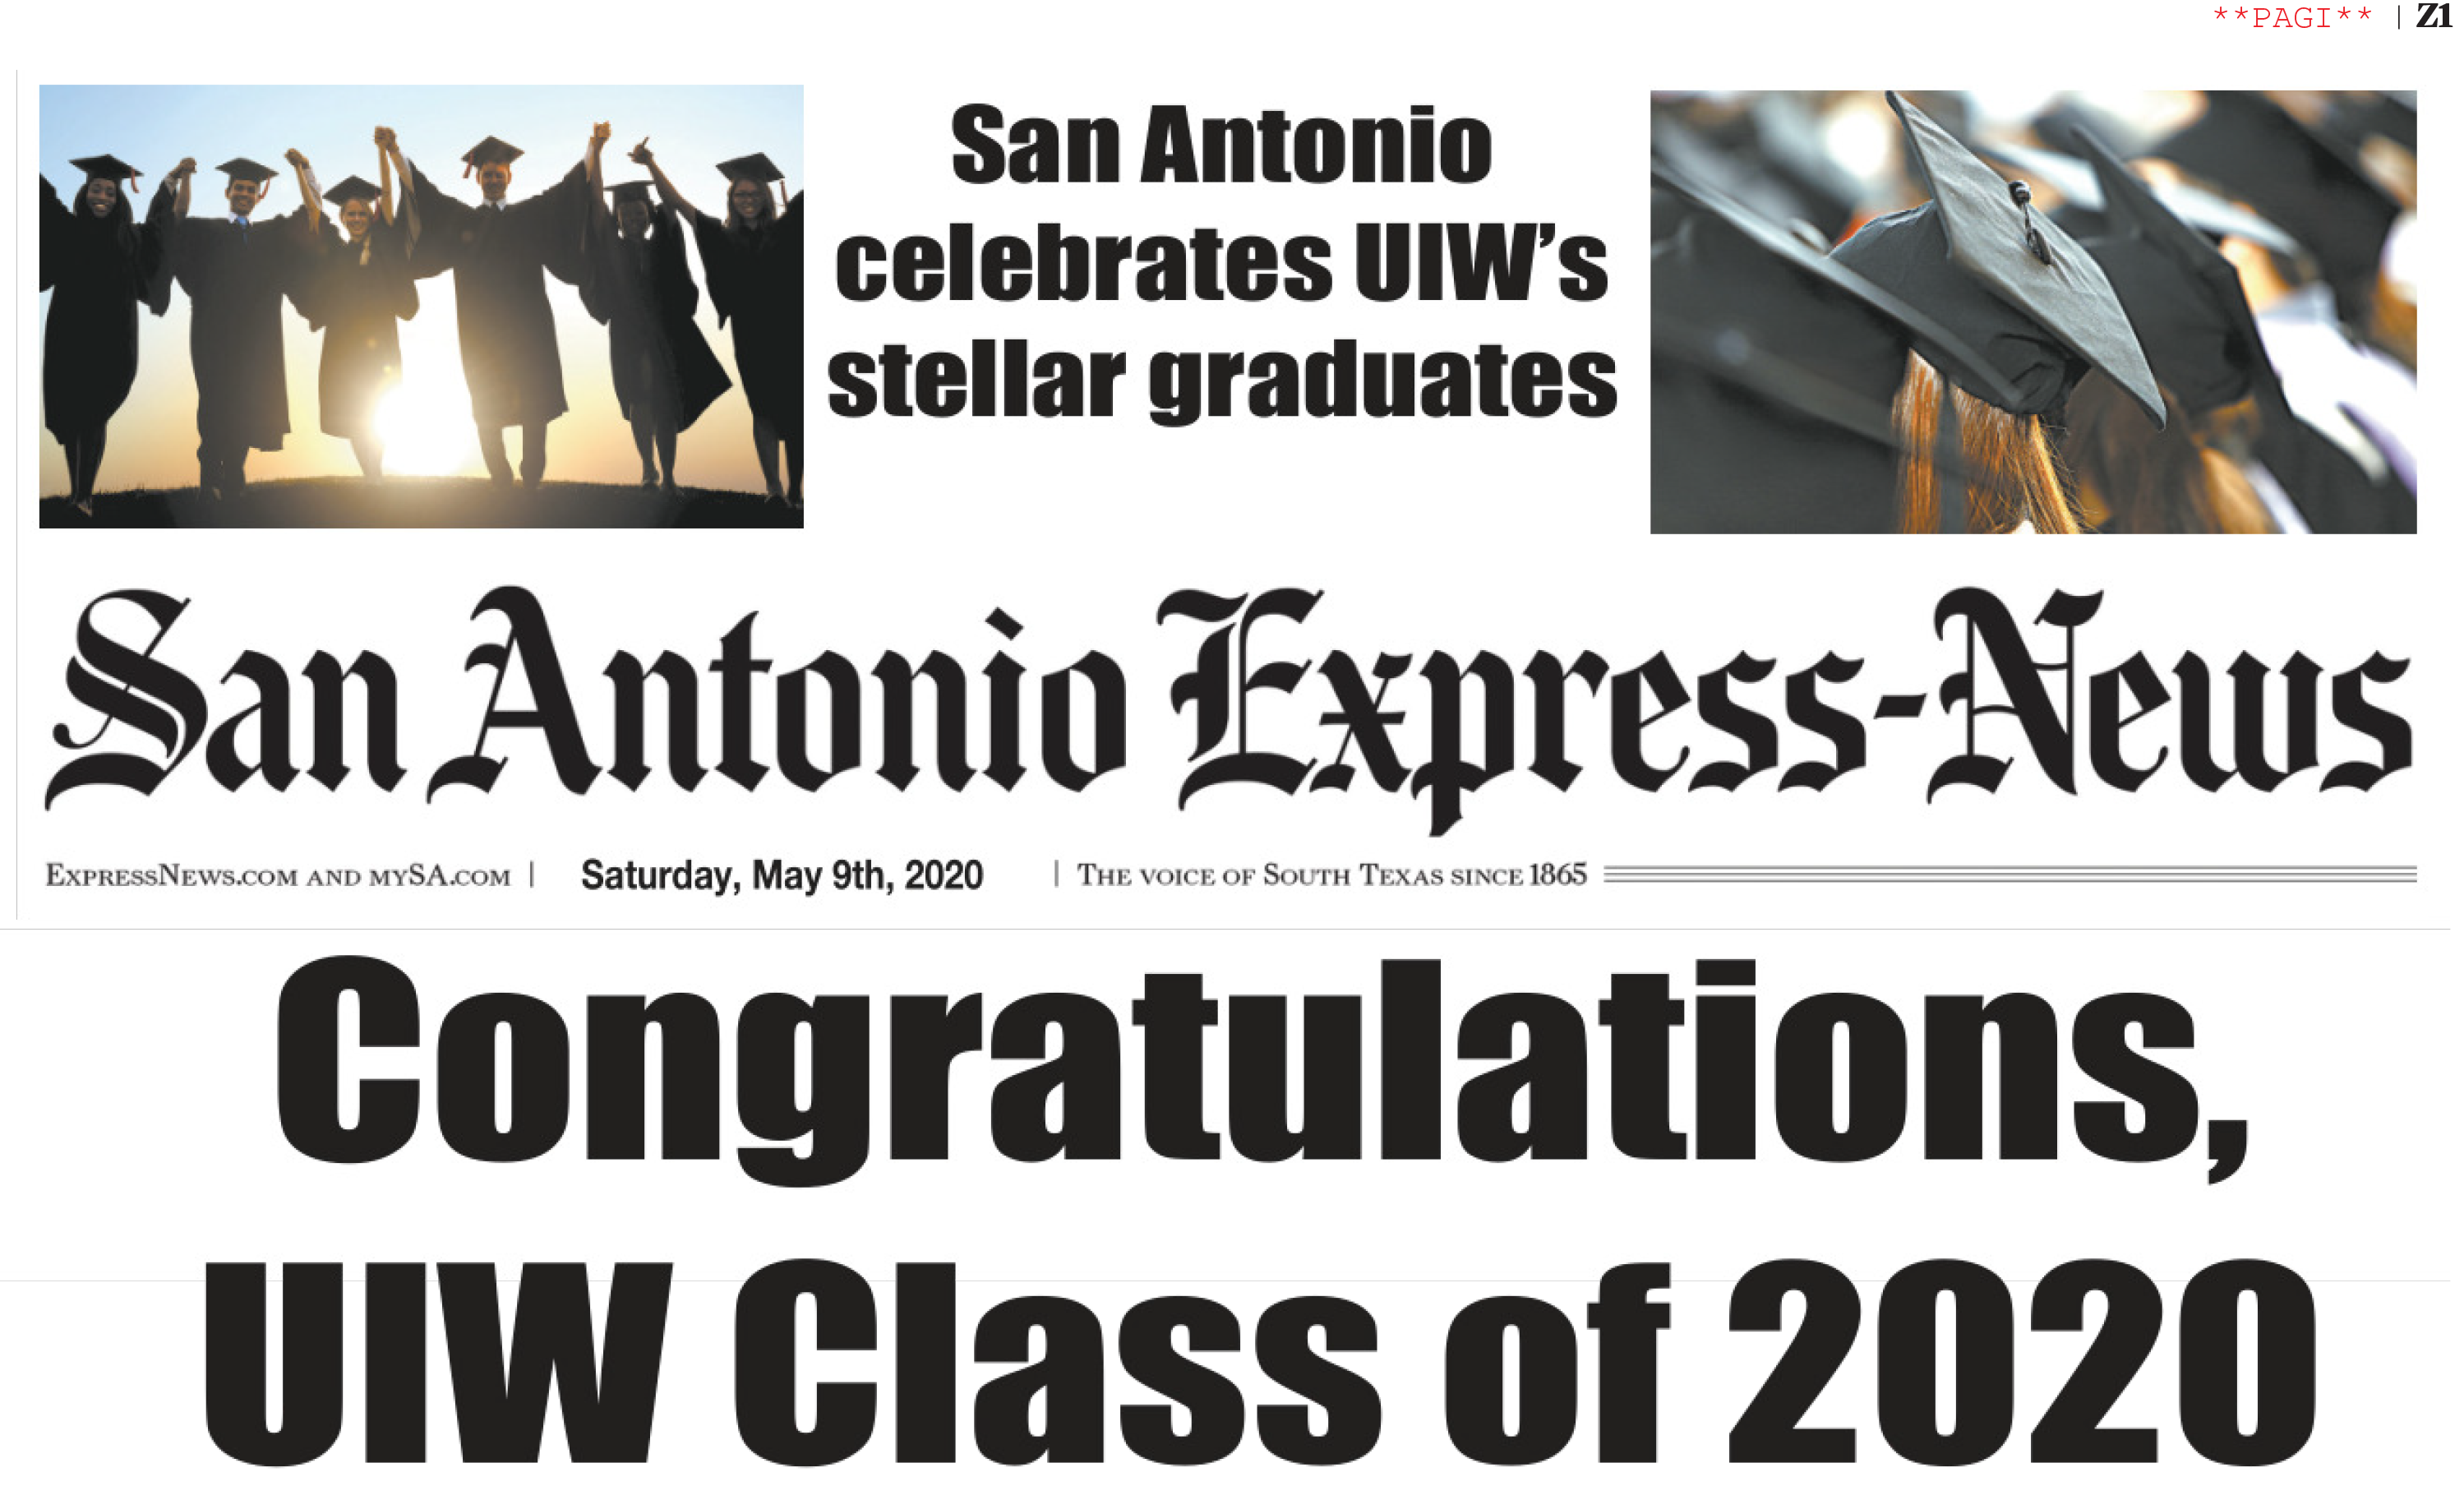 A screenshot of a digital San Antonio News Express (The voice of South Texas since 1865) headline from Saturday, May 9, 2020 with the text, “San Antonio celebrates UIW’s stellar graduates“ above the paper’s name between images of a group of graduates with arms raised with the sunset behind them and another image of a group of grads wearing cap and gown. Below the name of the newspaper is the headline text, “Congratulations UIW Class of 2020”